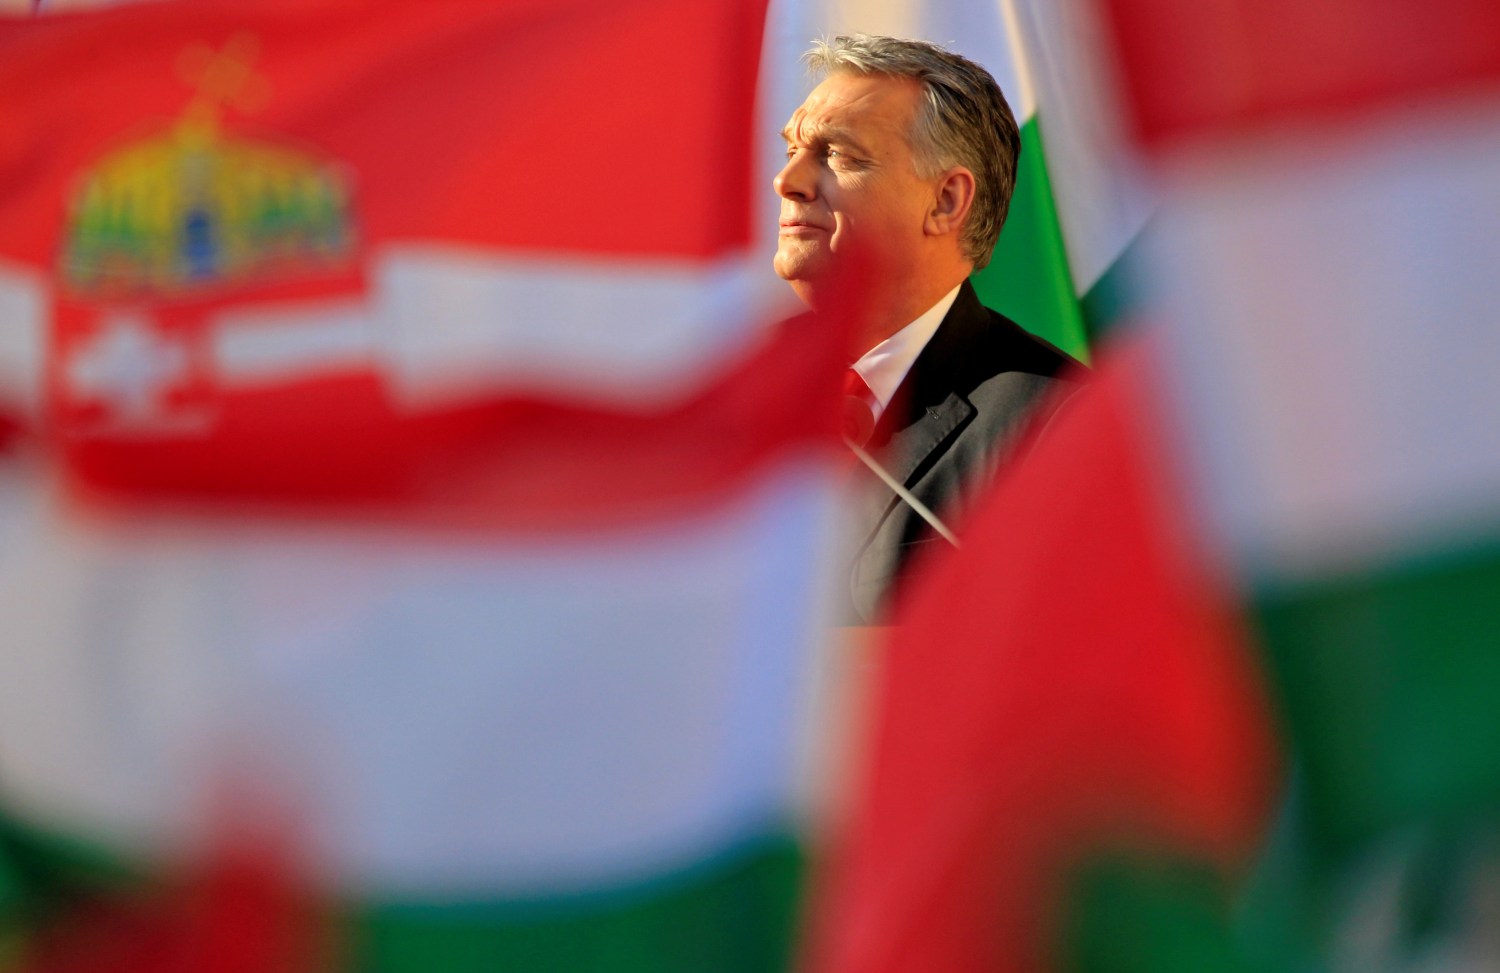 Hungarian Prime Minister Viktor Orban speaks during his campaign closing rally in Szekesfehervar, Hungary, April 6, 2018. REUTERS/Bernadett Szabo     TPX IMAGES OF THE DAY - RC1C1F3EDD10